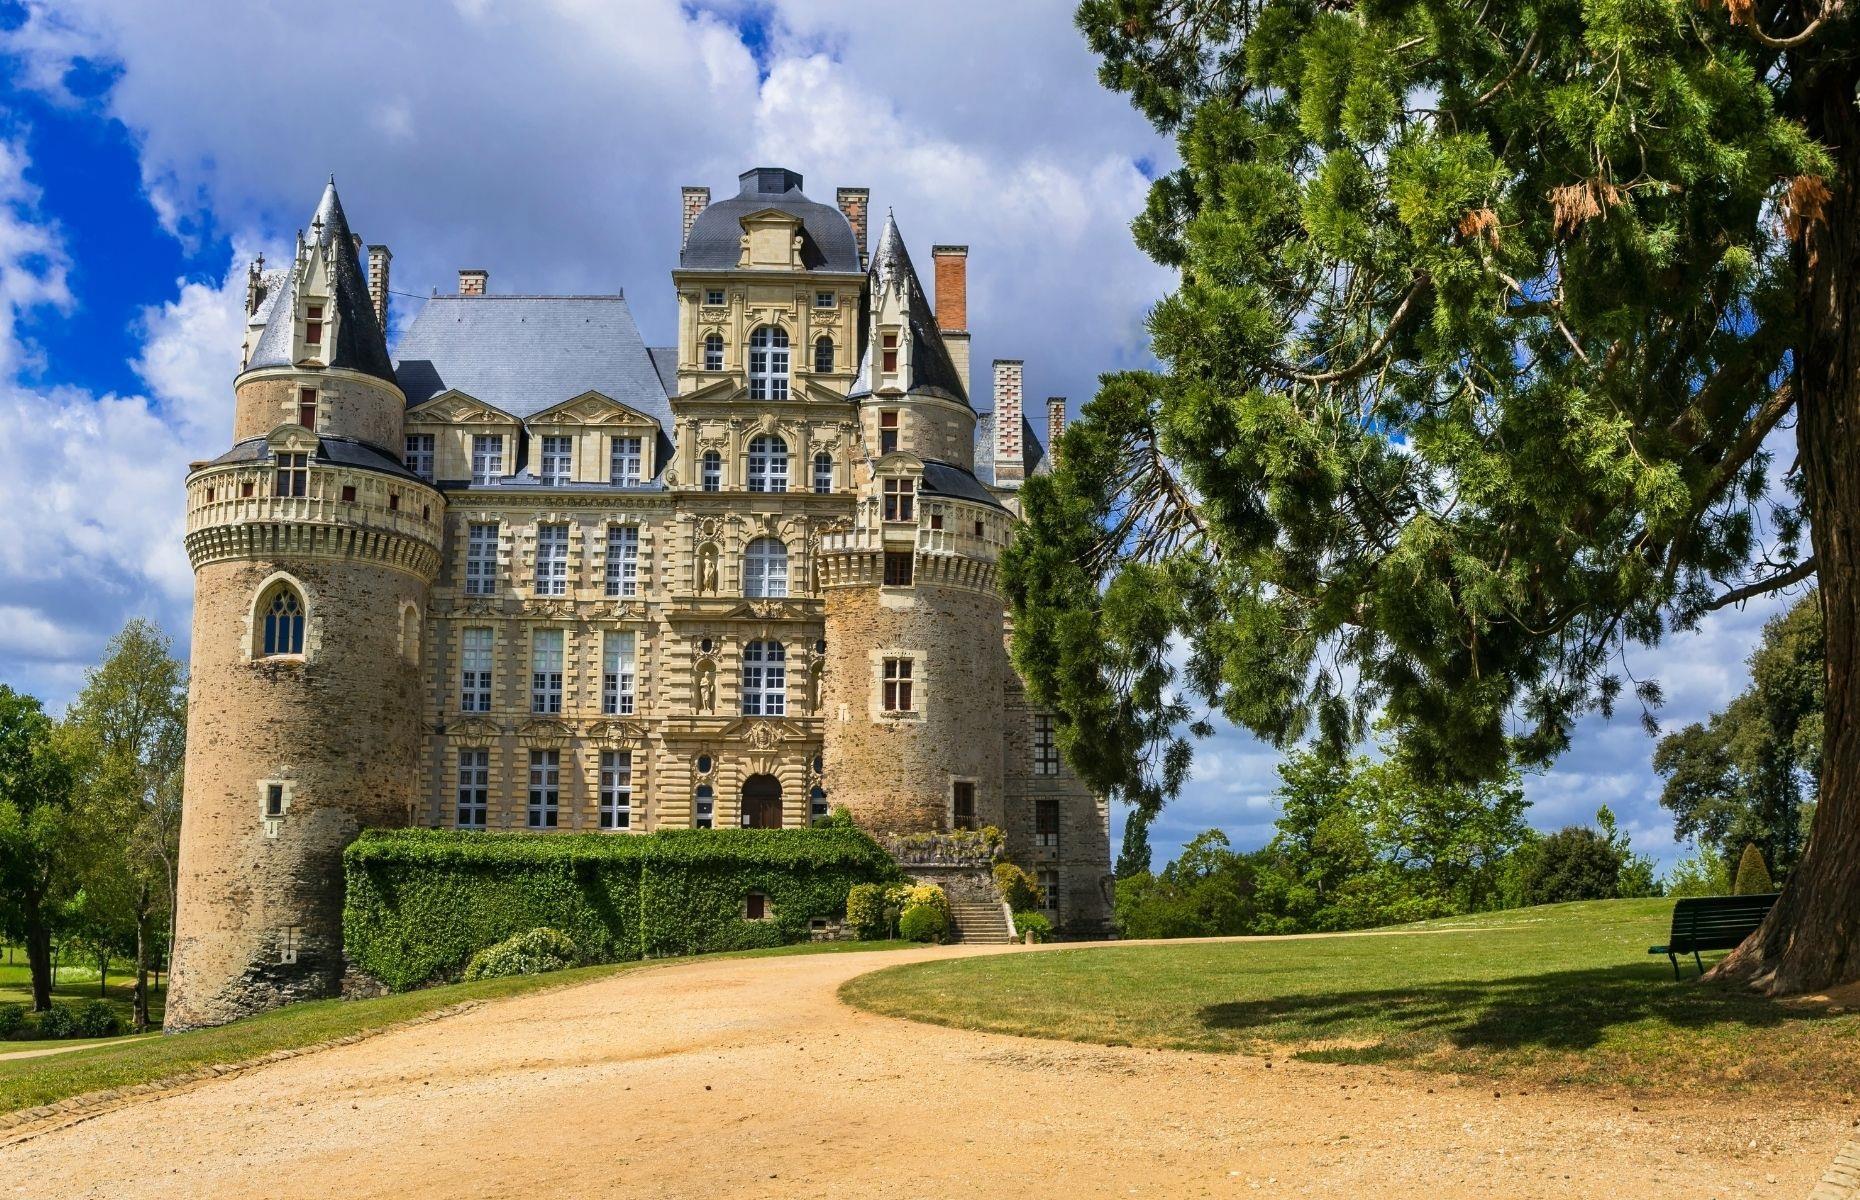 <p>This might look like any other dreamy chateau in the wine-drenched Loire Valley – but <a href="https://chateau-brissac.fr/">Château de Brissac</a>, which has been built and rebuilt since the 11th century, has a darker side. It's said to be haunted by 'La Dame Verte' (the Green Lady), the phantom of a woman who was apparently murdered here many years ago. Take a tour through the opulent castle – with its period artworks, gilded detailing and red velvet drapes – and you might even catch a glimpse of her.</p>